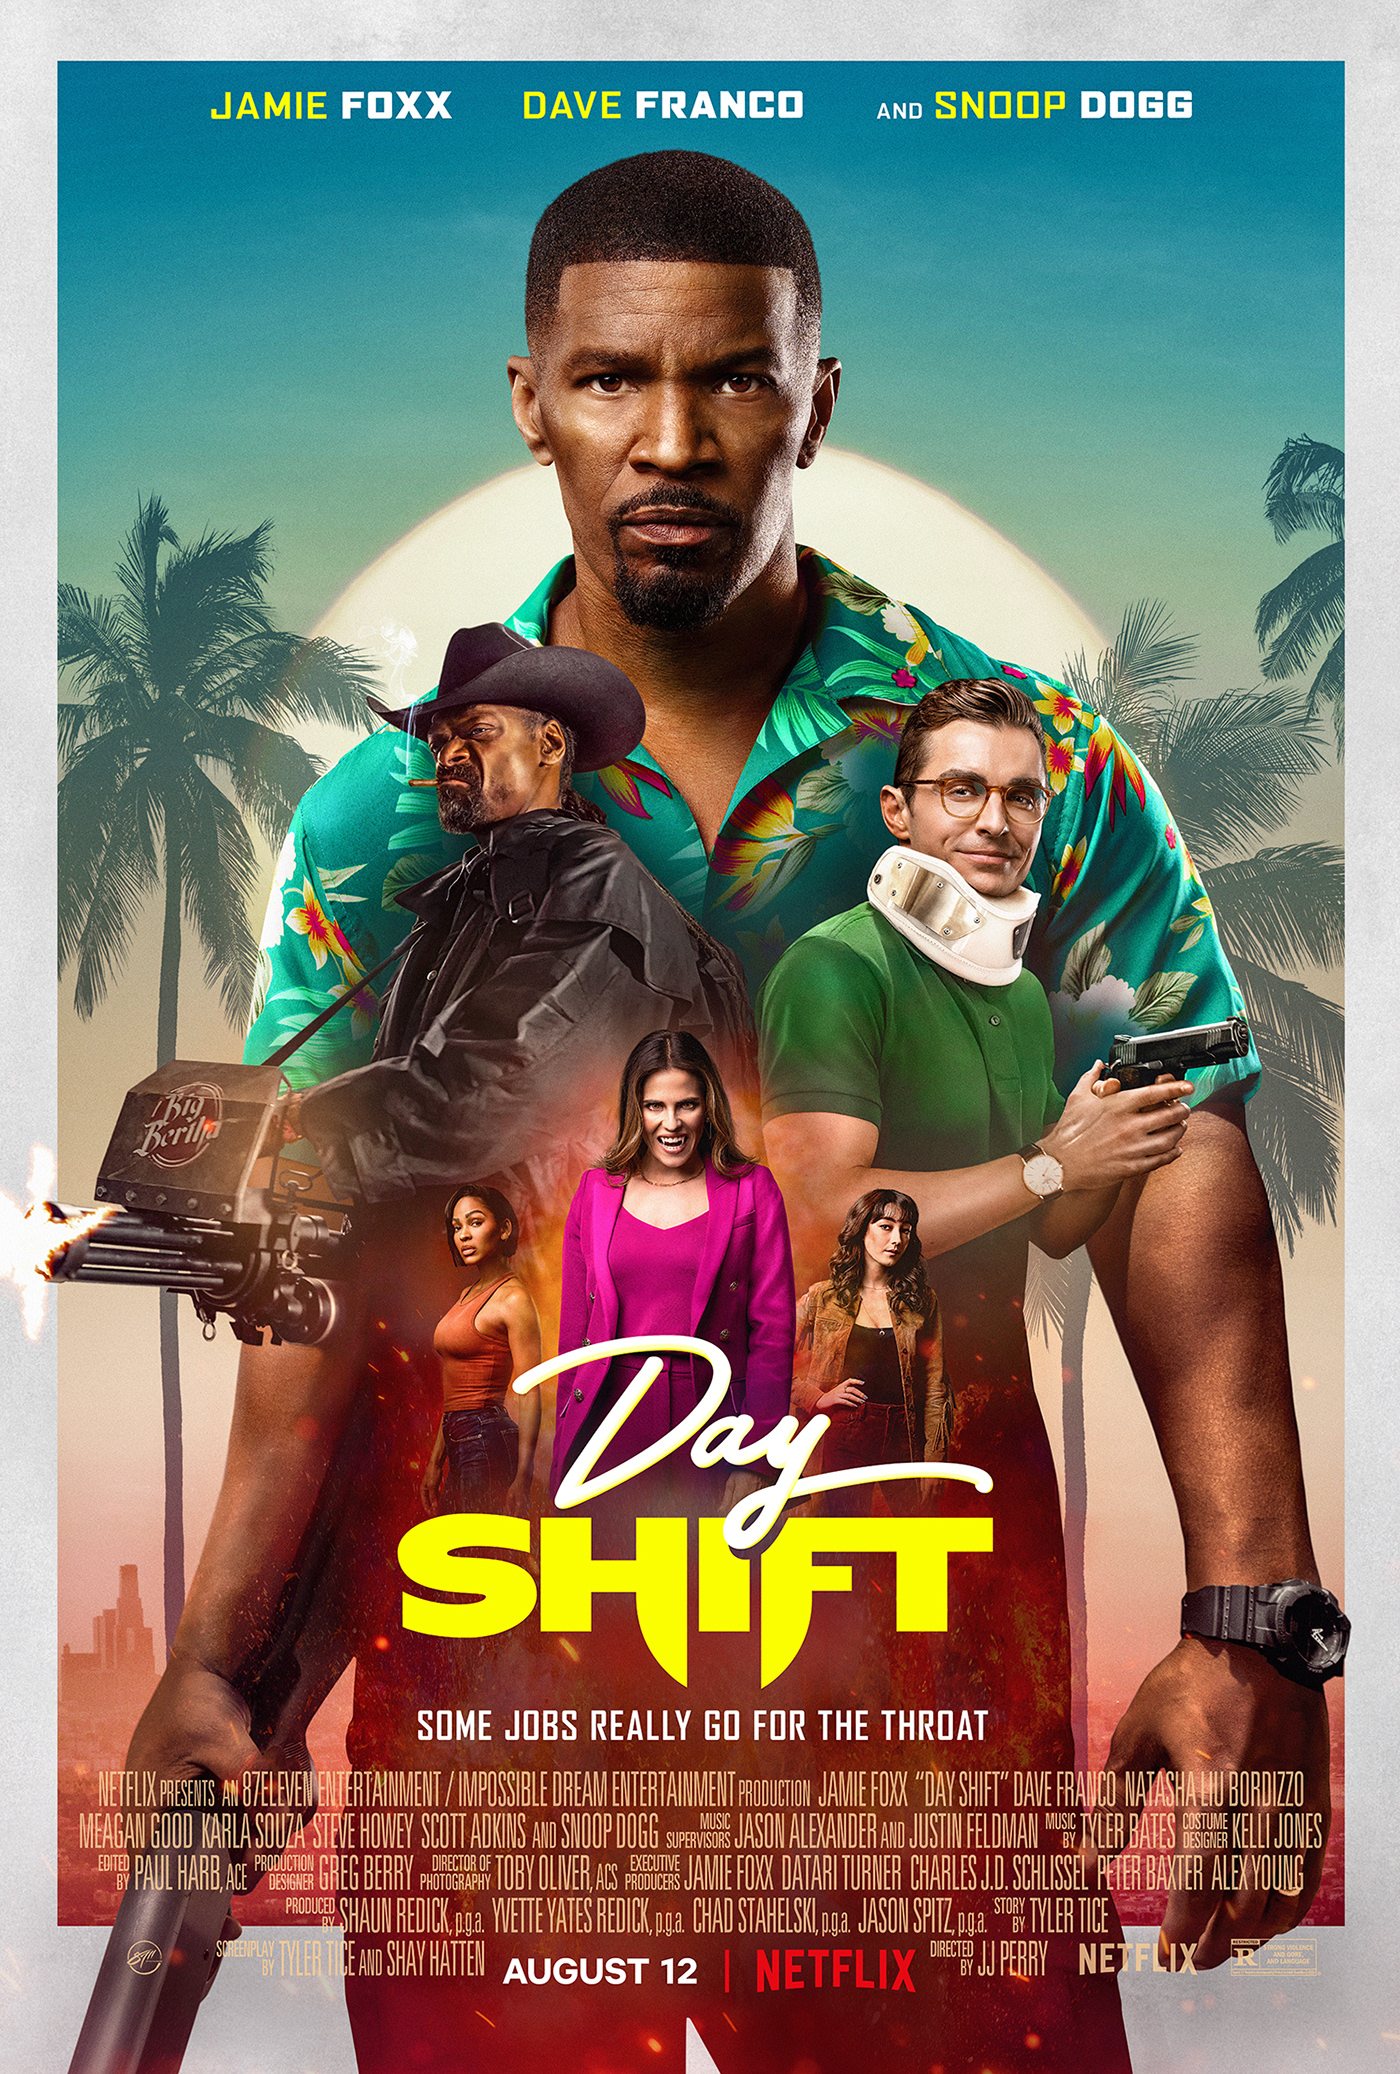 character poster dave franco Day Shift JAMIE FOXX key art movie poster Netflix payoff Snoop Dogg vampire